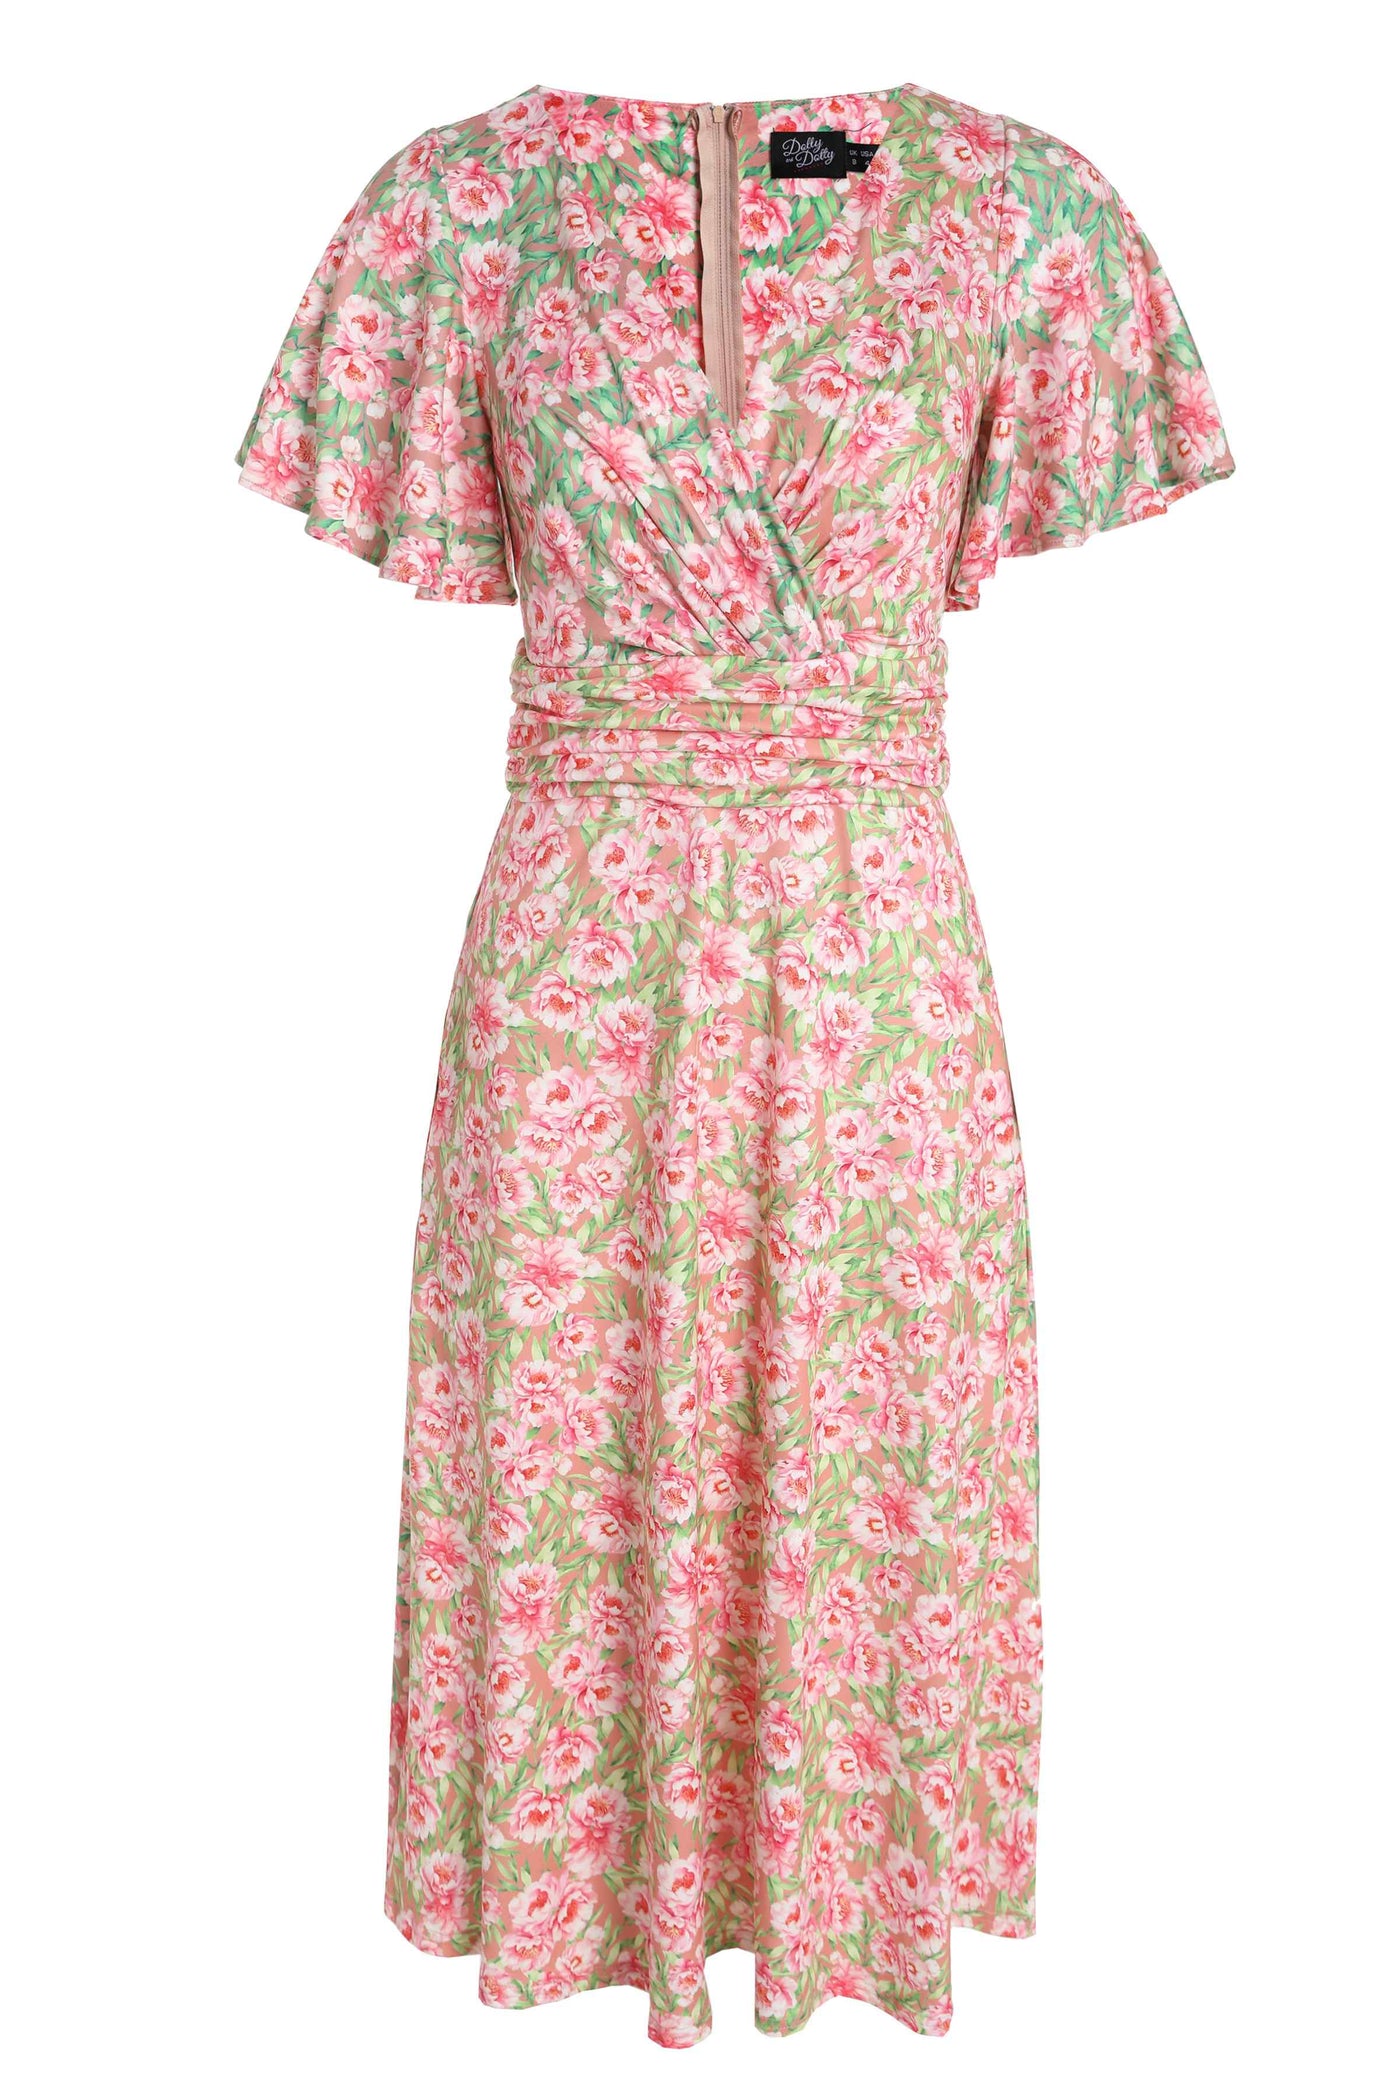 Front View of Pink Floral Casual Short Sleeved Dress